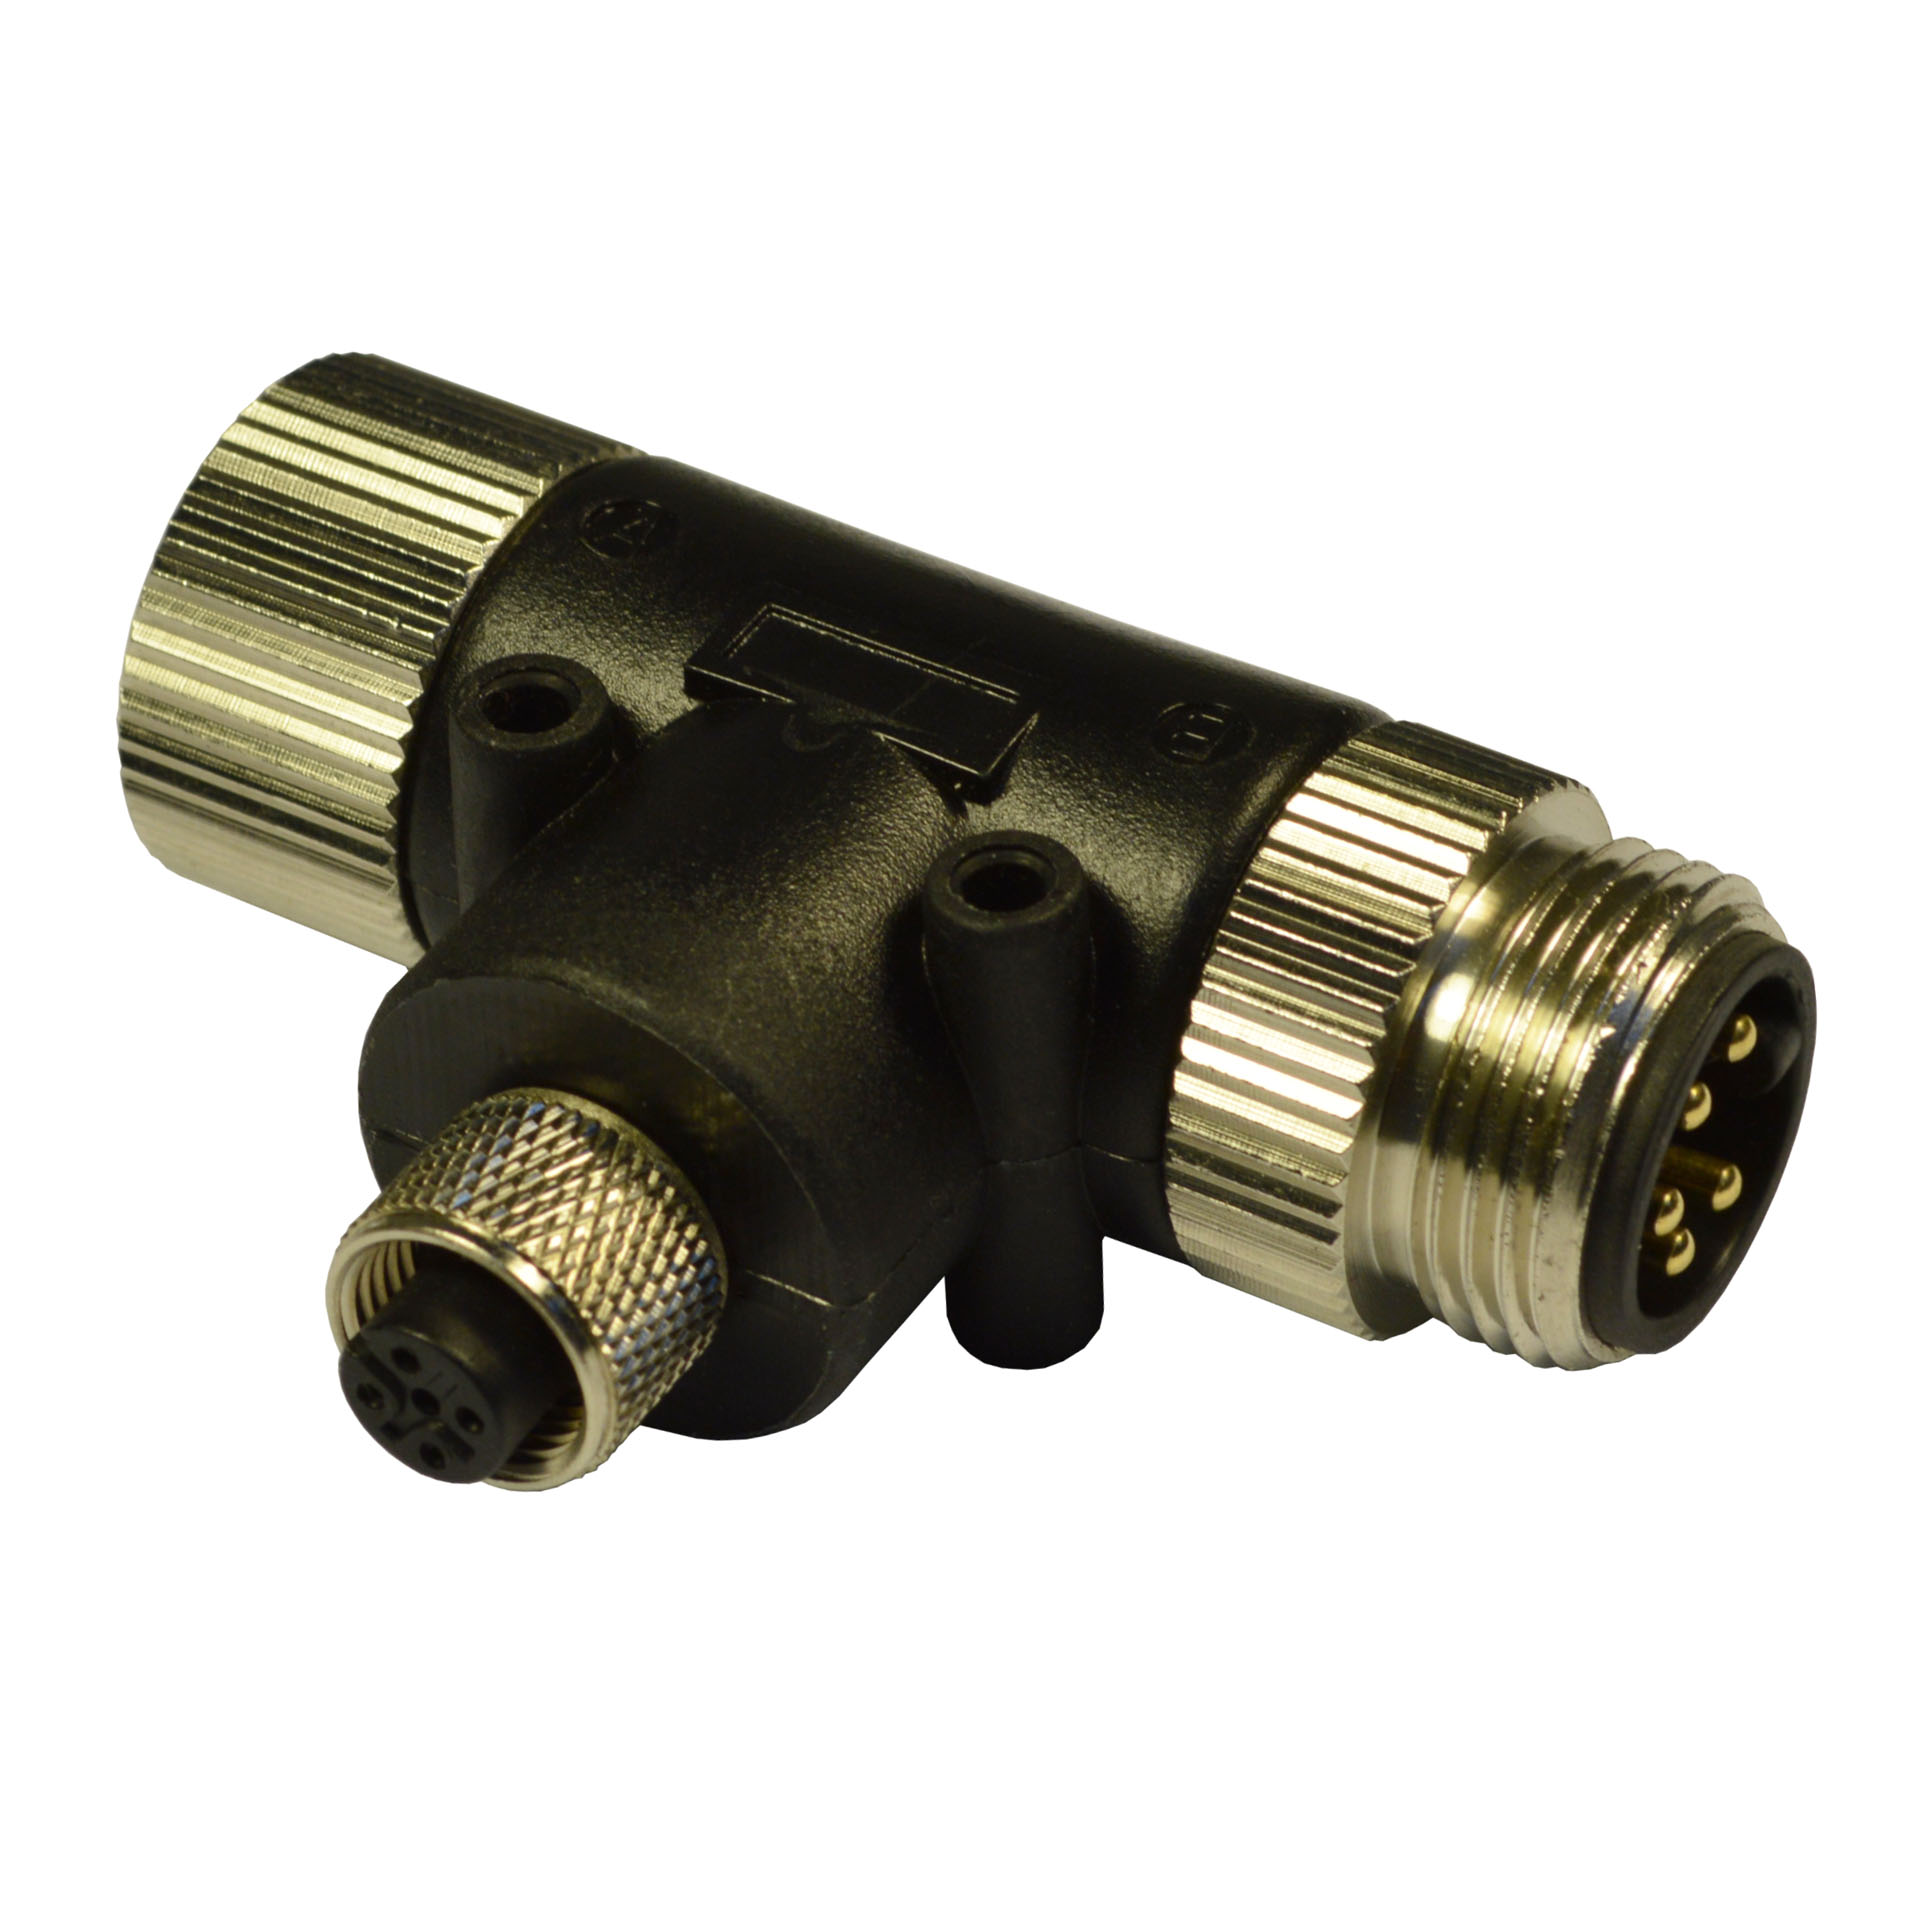 7/8" T connector, SIDE A:female 5p. SIDE B:male 5p., INPUT: M12 female 5p. ,Parallel circuit.